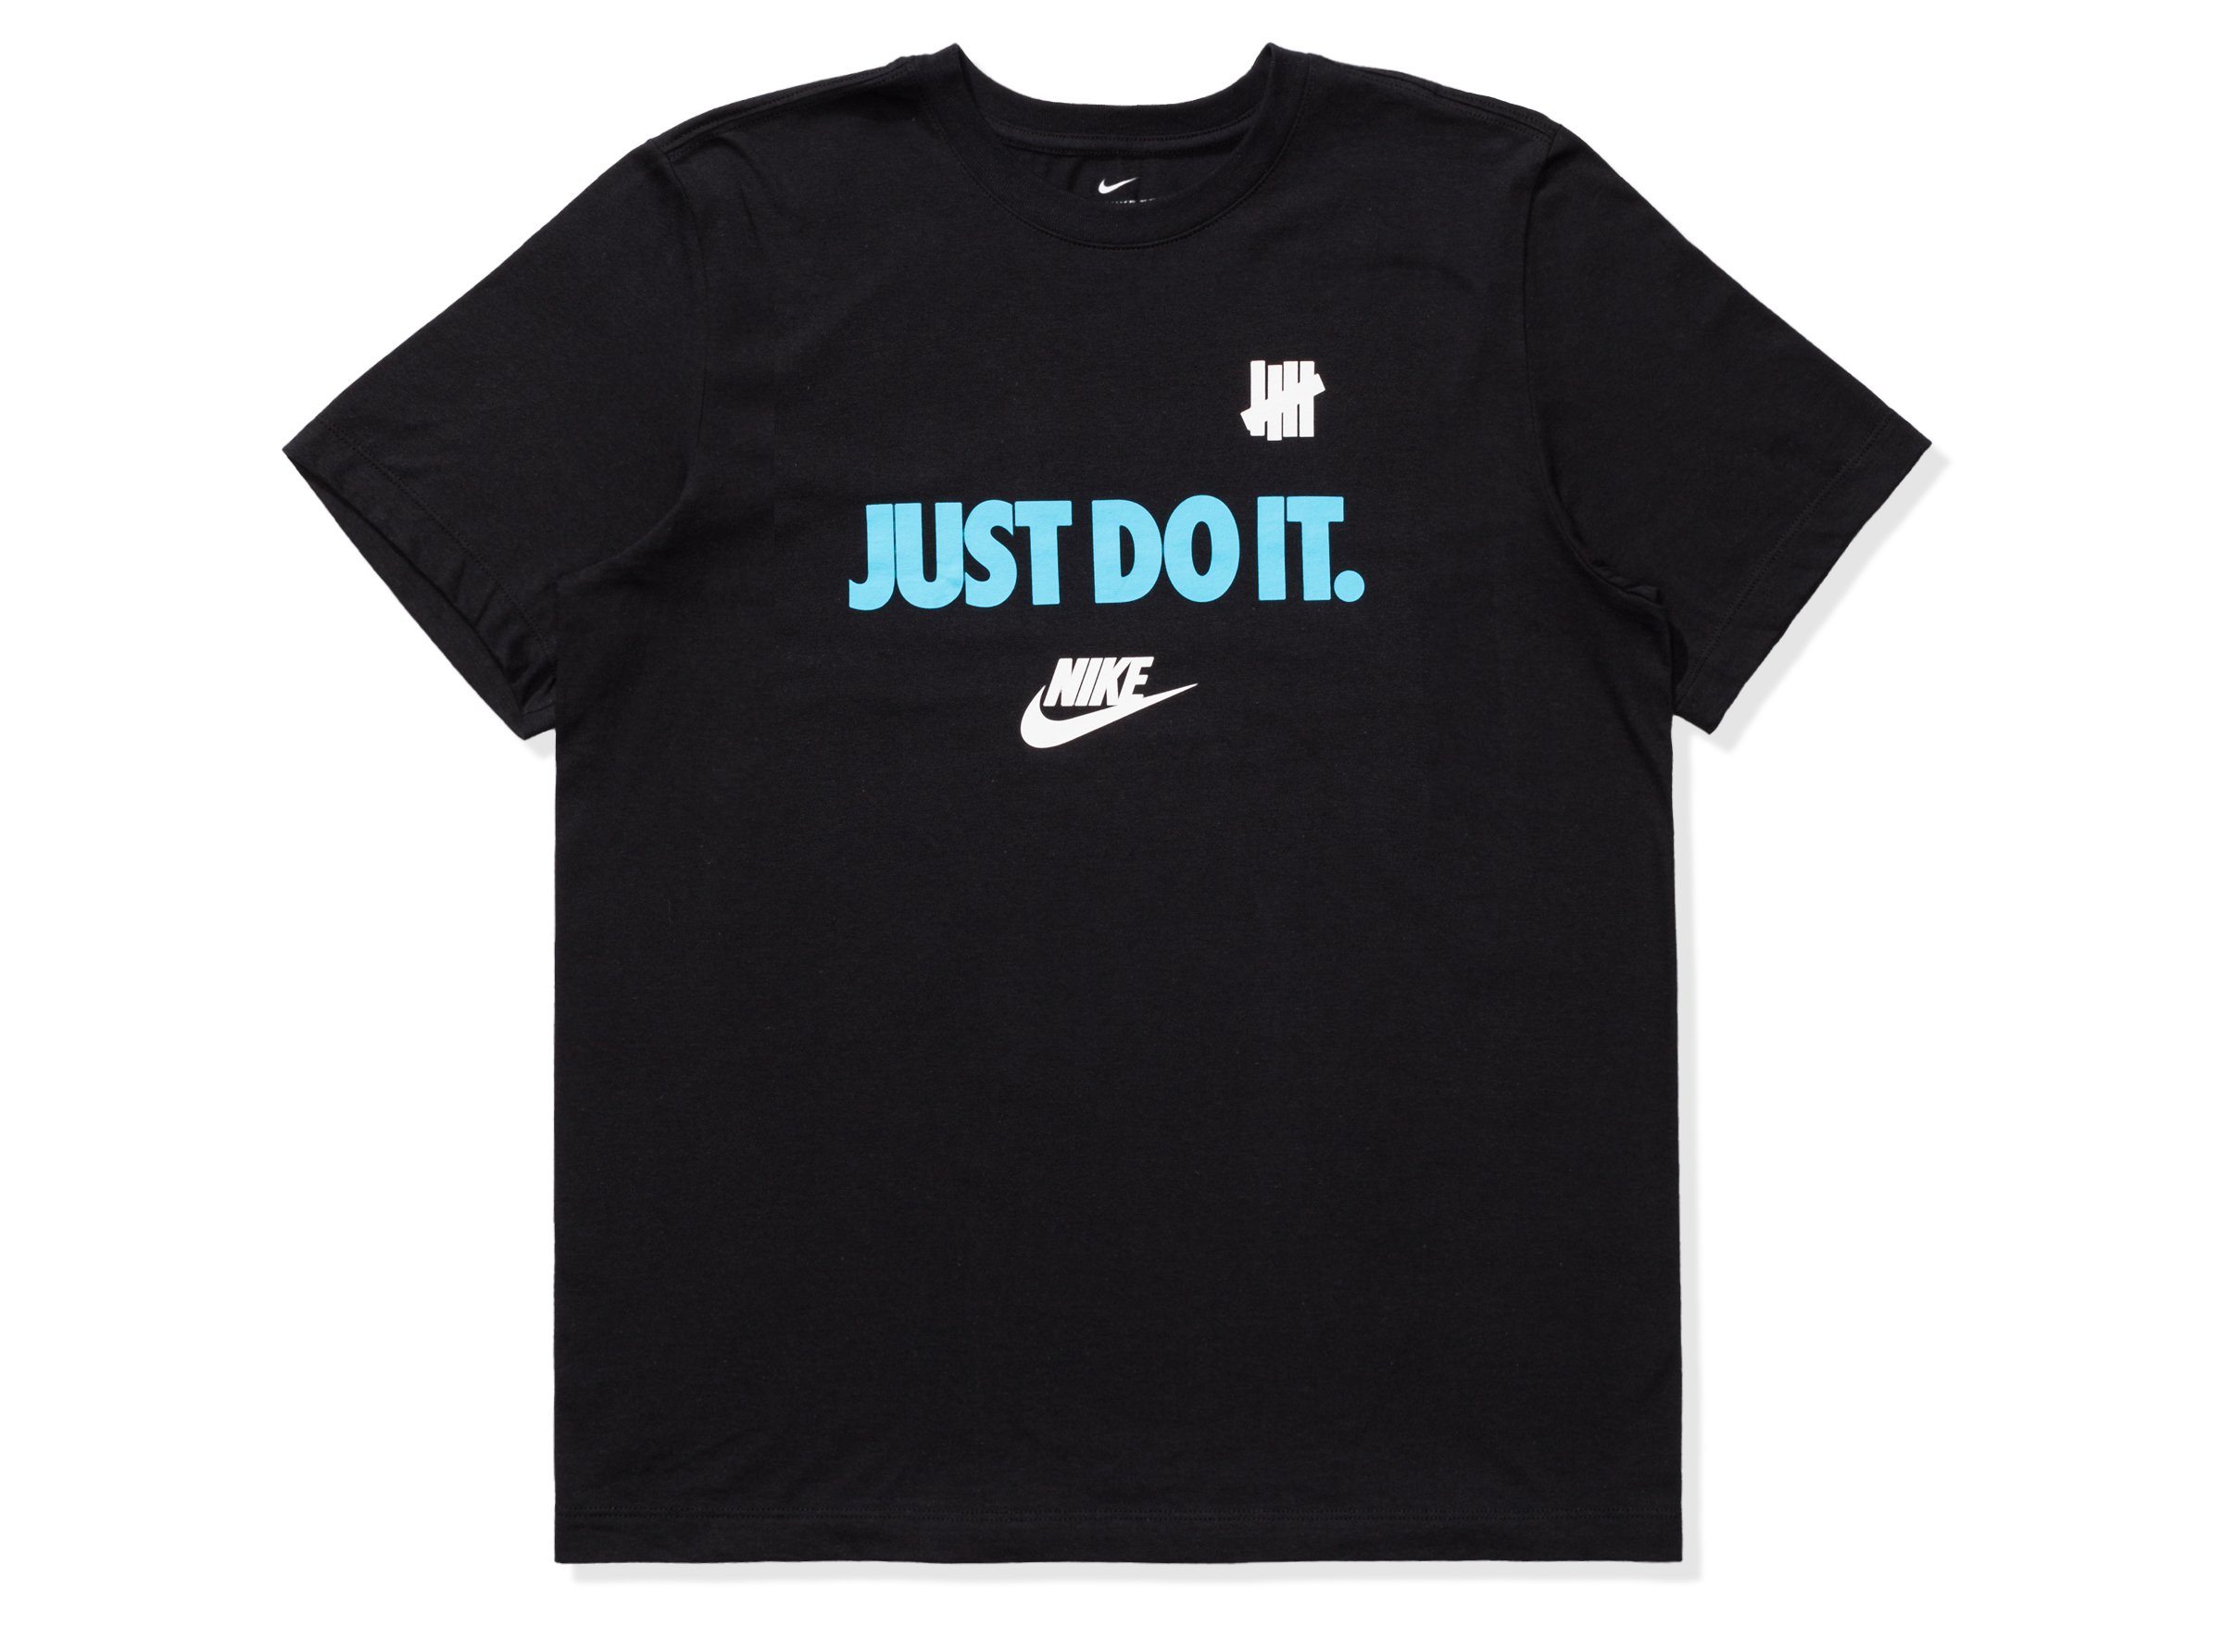 Nike x Undefeated Just Do It Tee Black Men's - FW19 - US